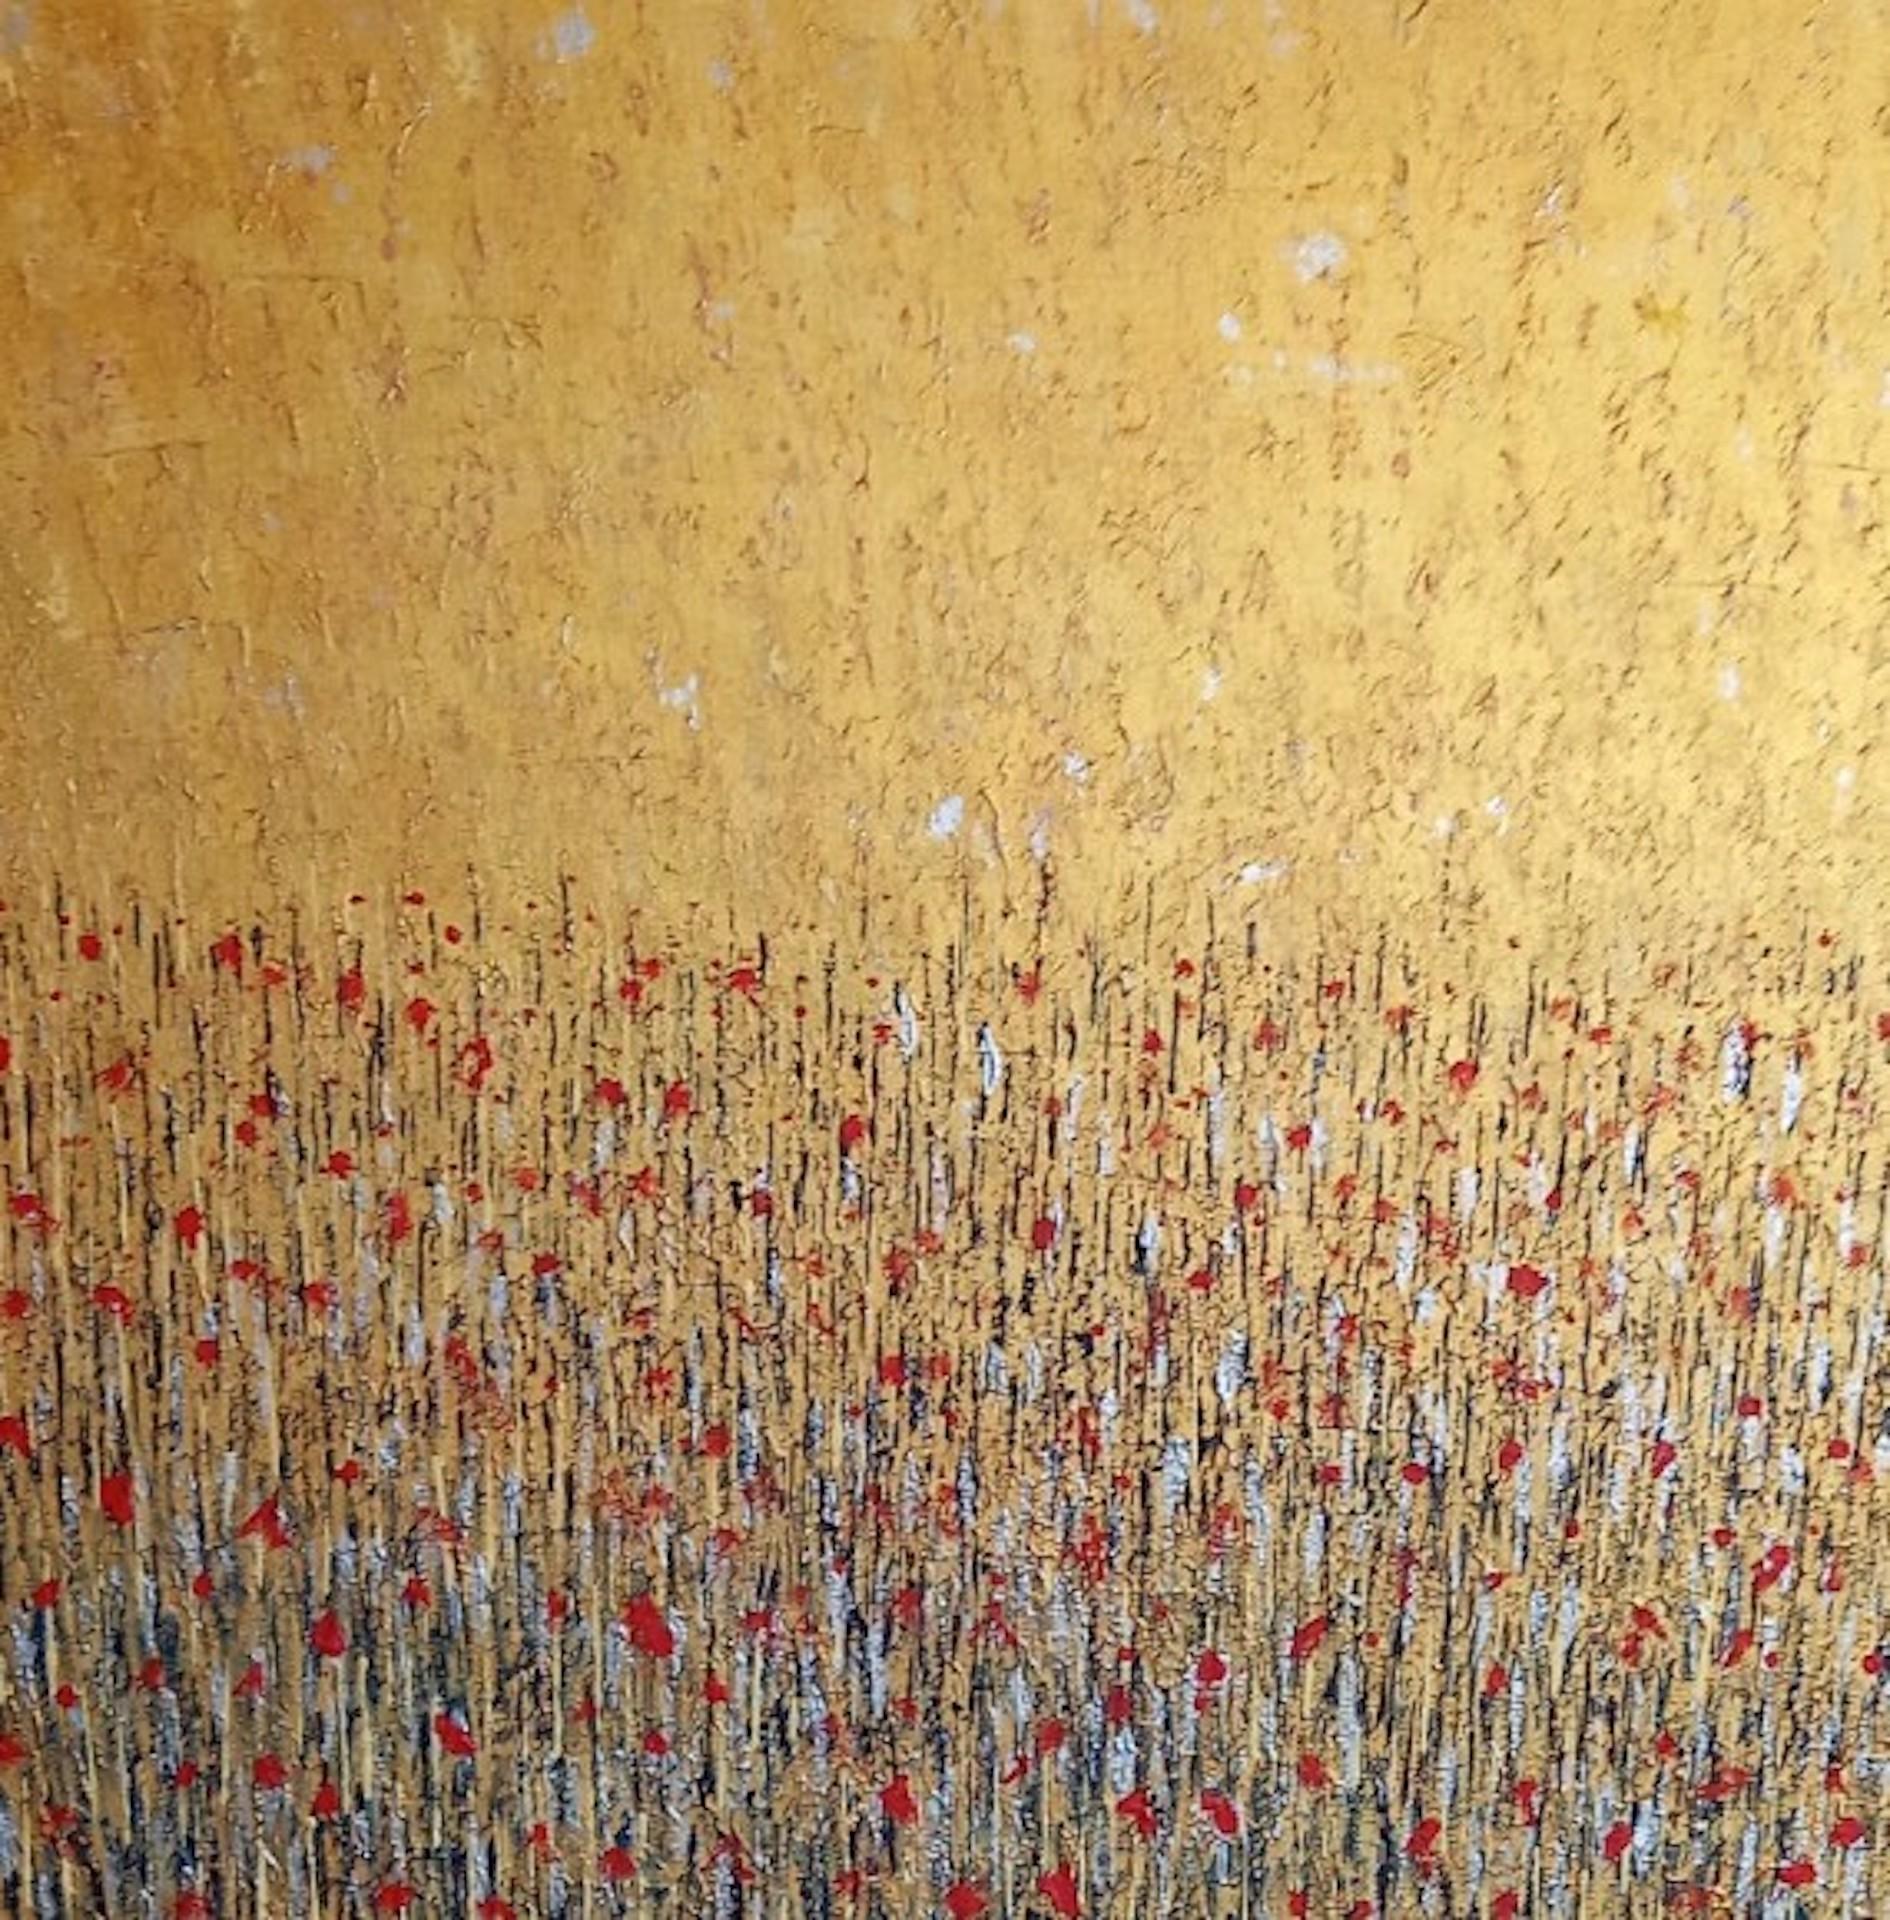 Fields of Gold by Pixie Willoughby [2021]

original
Acrylic on canvas
Image size: H:61 cm x W:61 cm
Complete Size of Unframed Work: H:61 cm x W:61 cm x D:4cm
Sold Unframed
Please note that insitu images are purely an indication of how a piece may